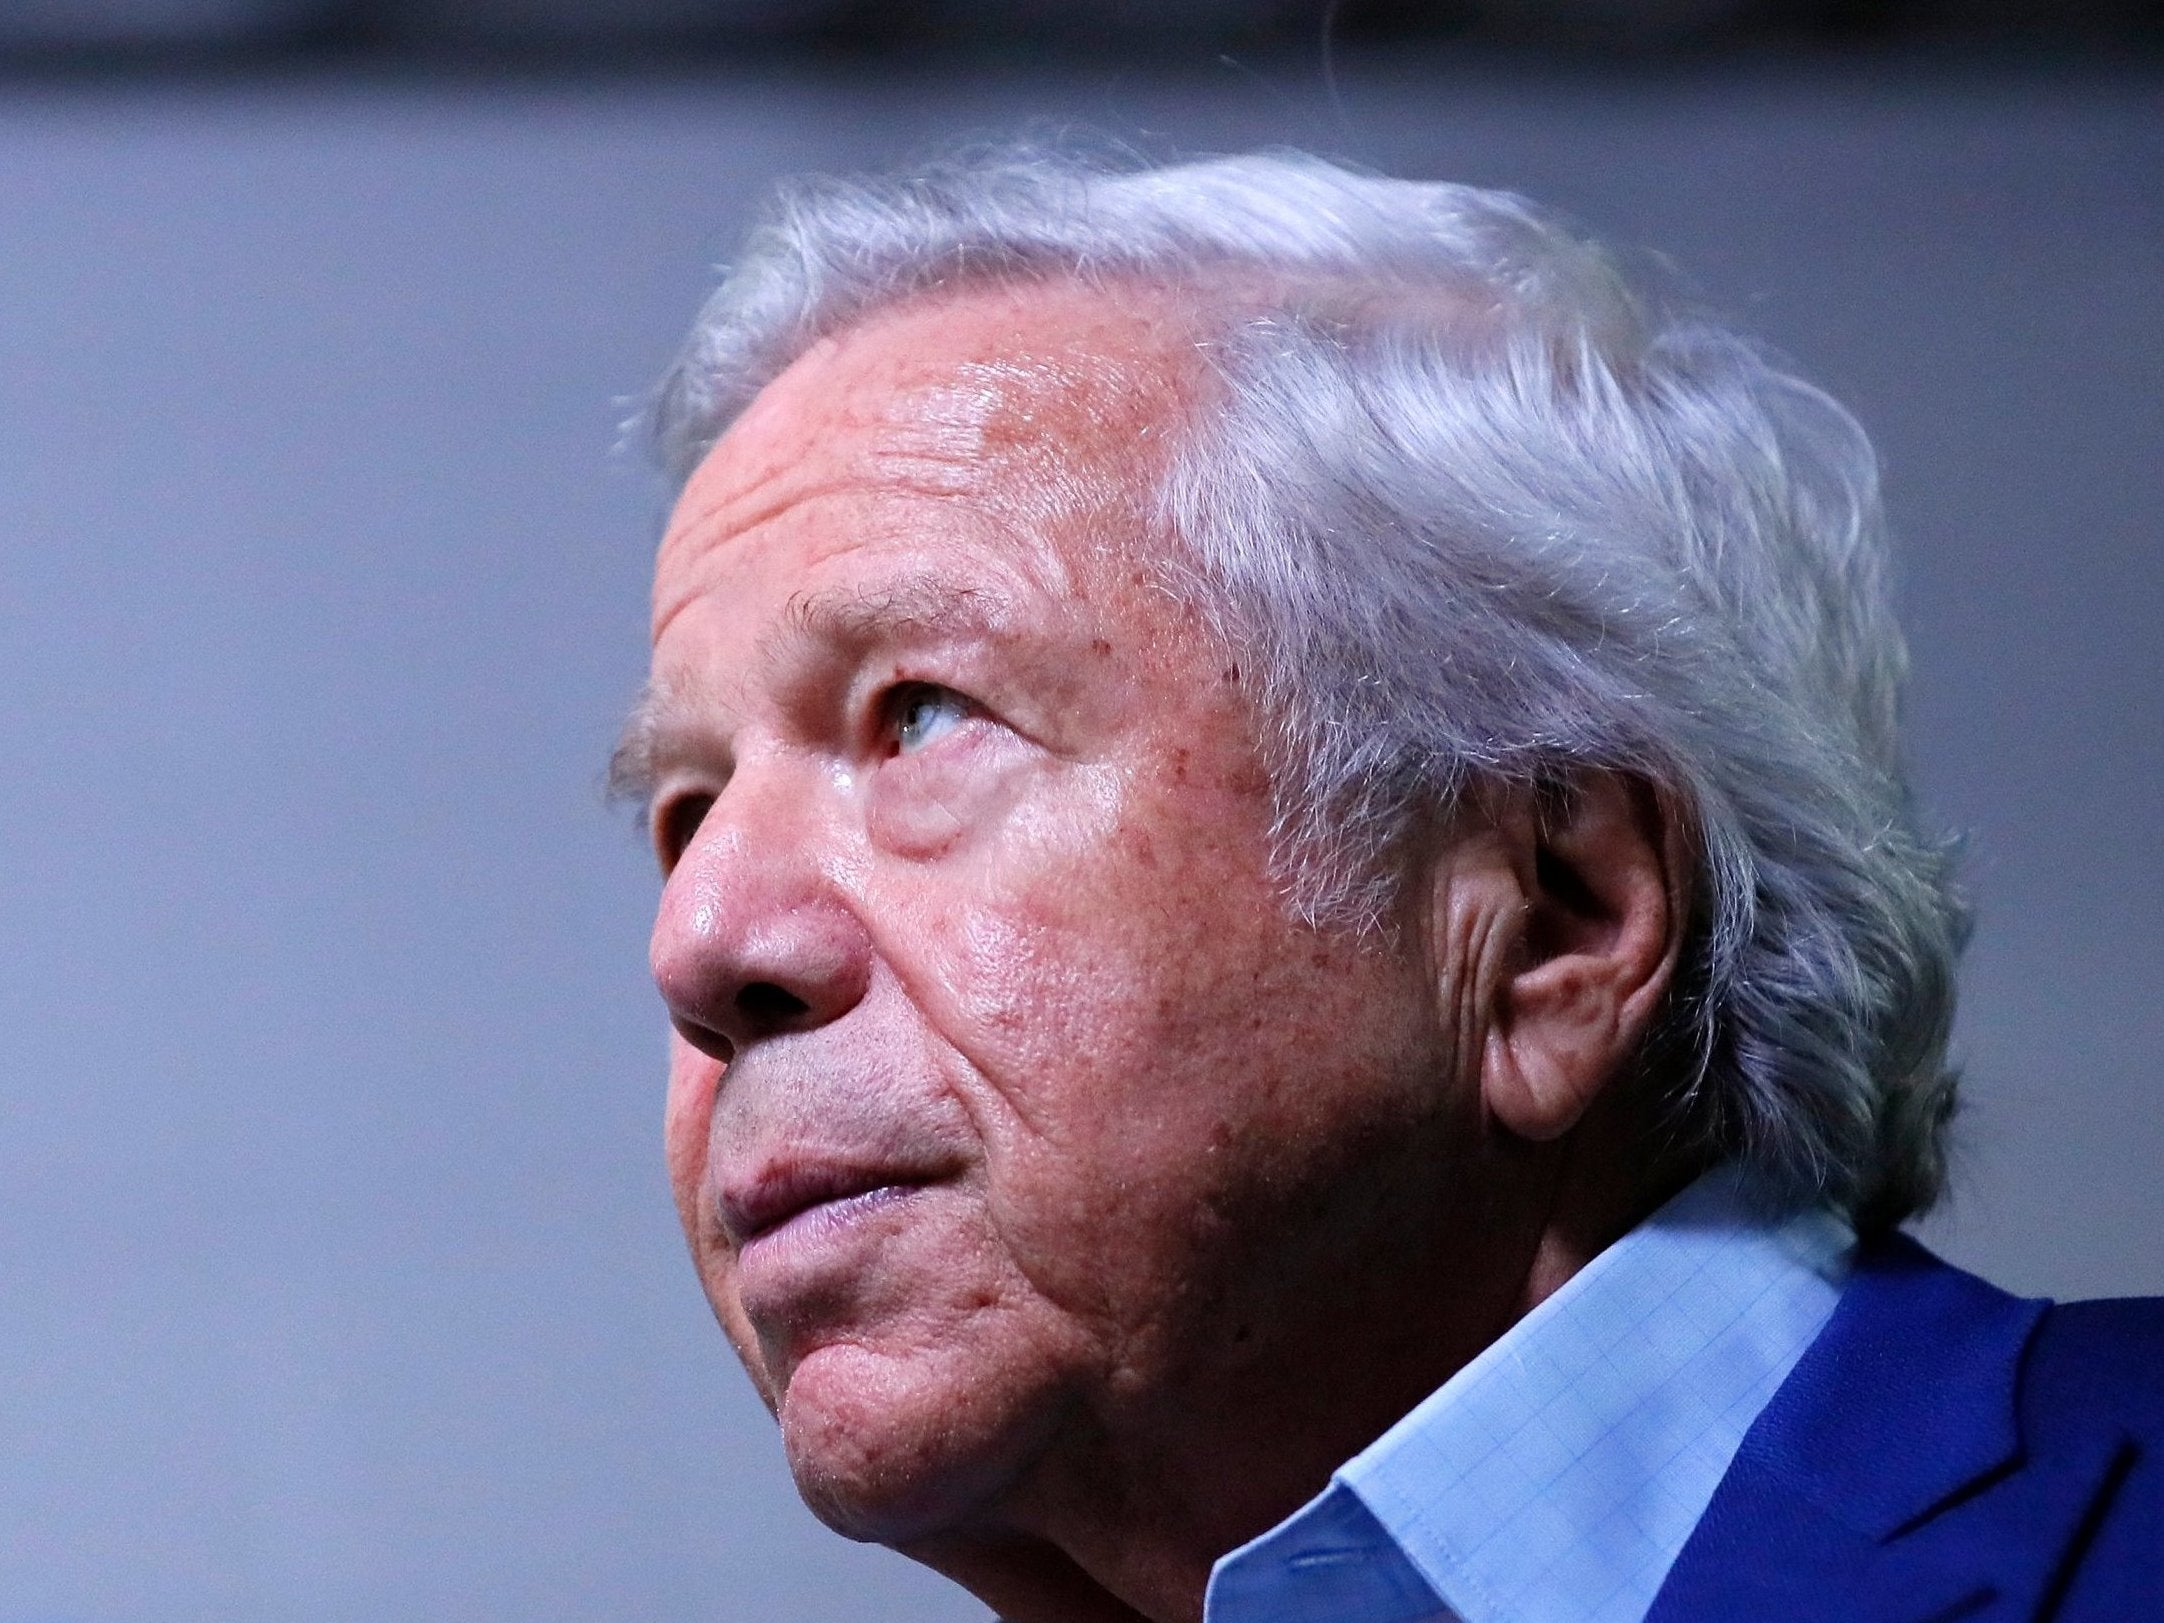 Robert Kraft was charged with the two misdemeanor counts of soliciting prostitution last month